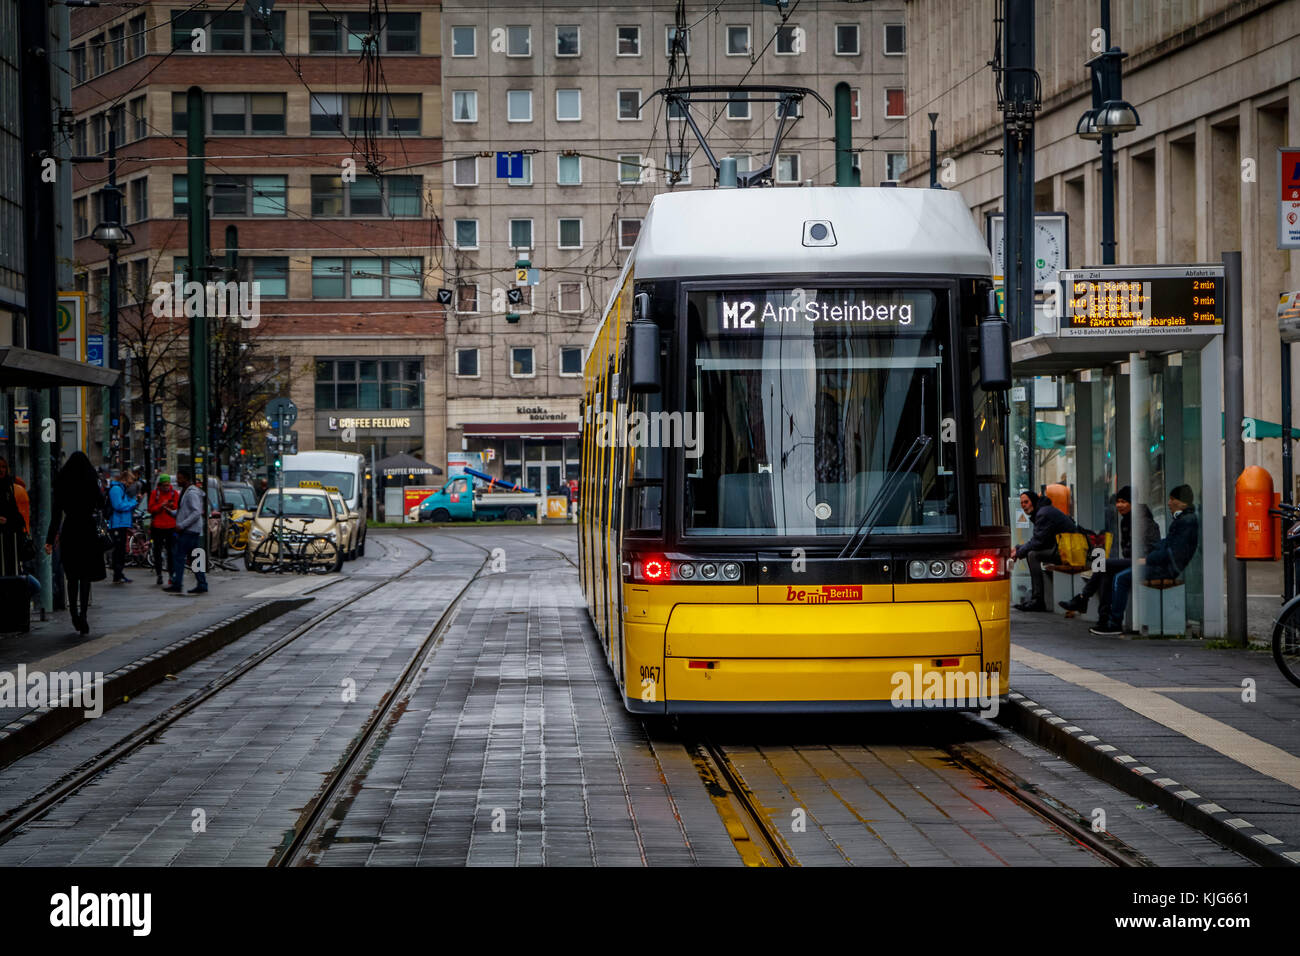 The M2 Steinberg tram arrives at Alexanderplatz, central Mitte district of Berlin, Germany. Stock Photo